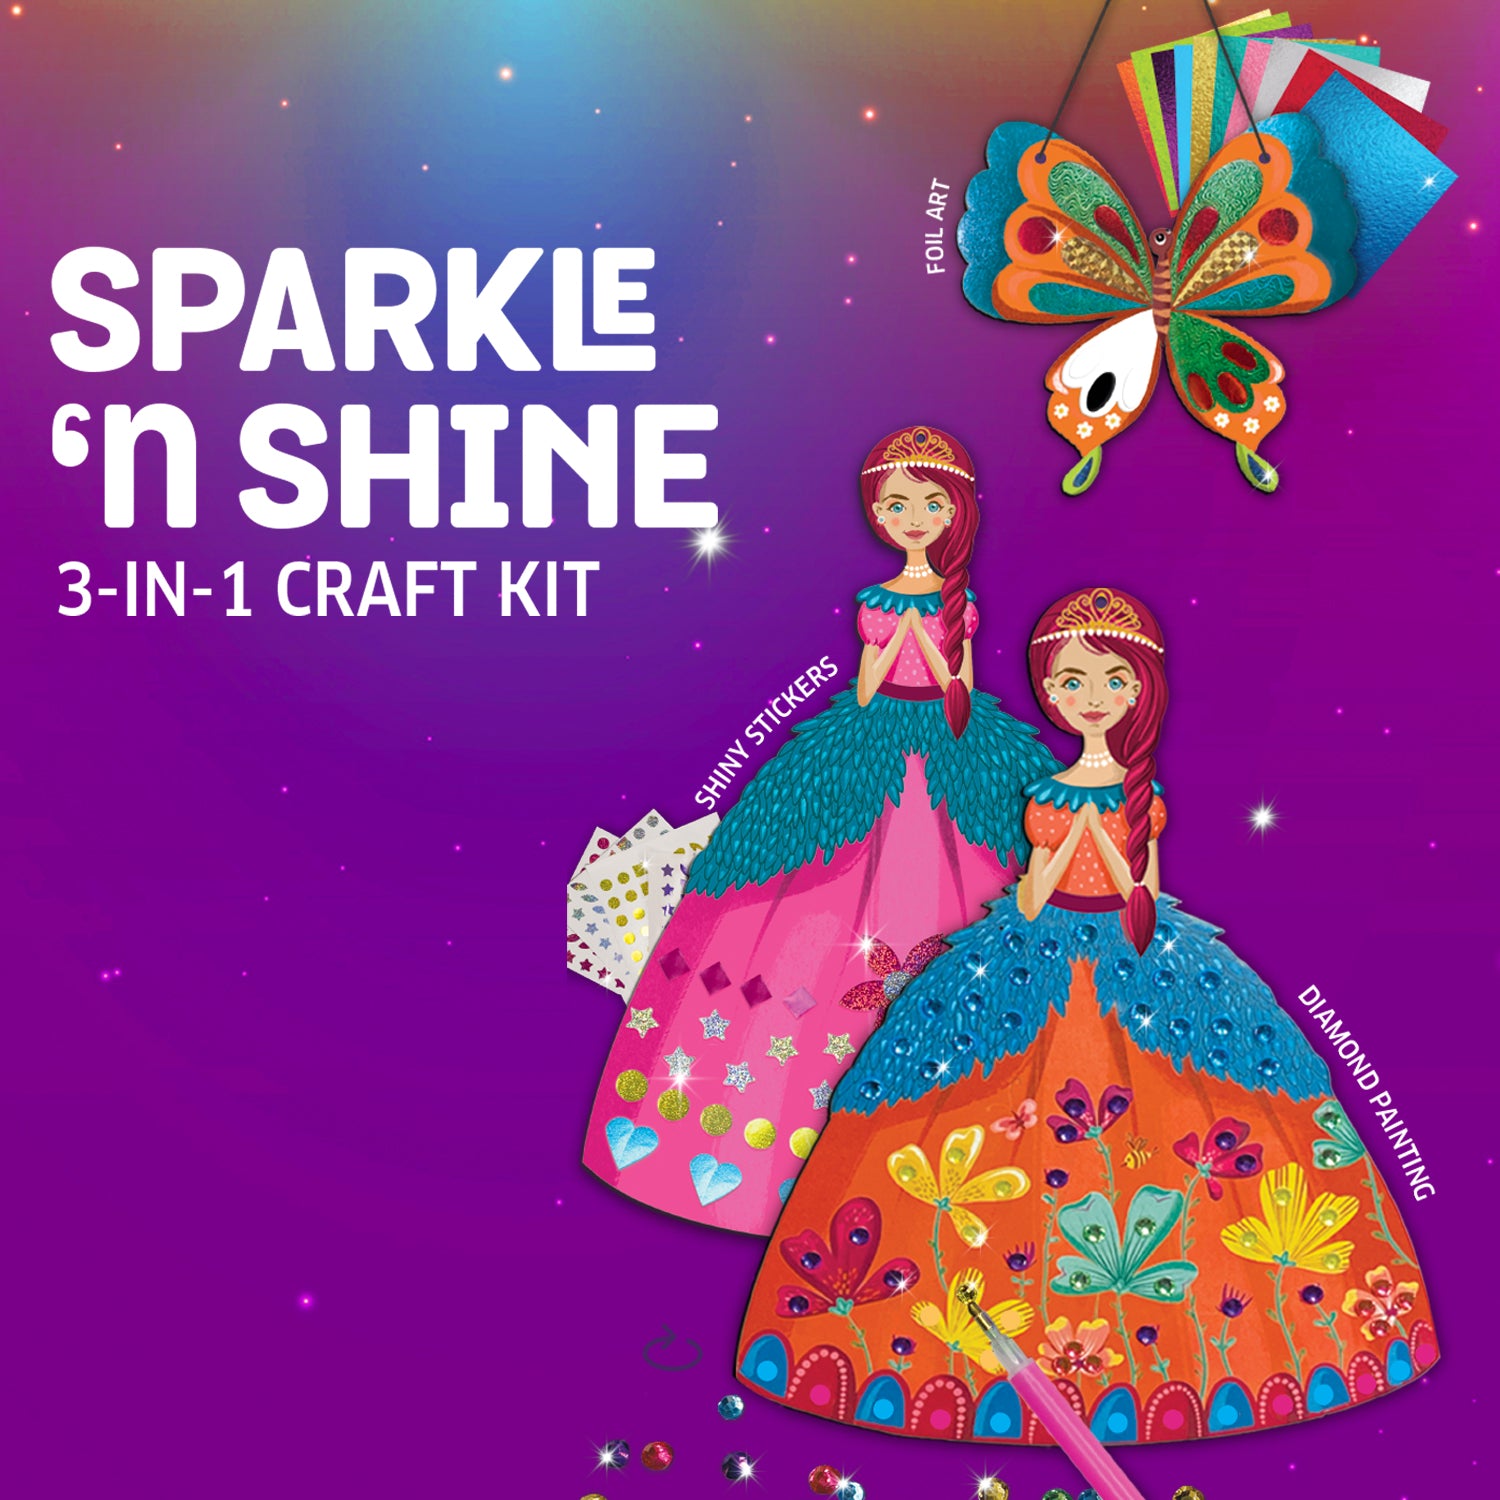 Chalk and Chuckles Sparkle n' Shine 3-in-1 craft kit